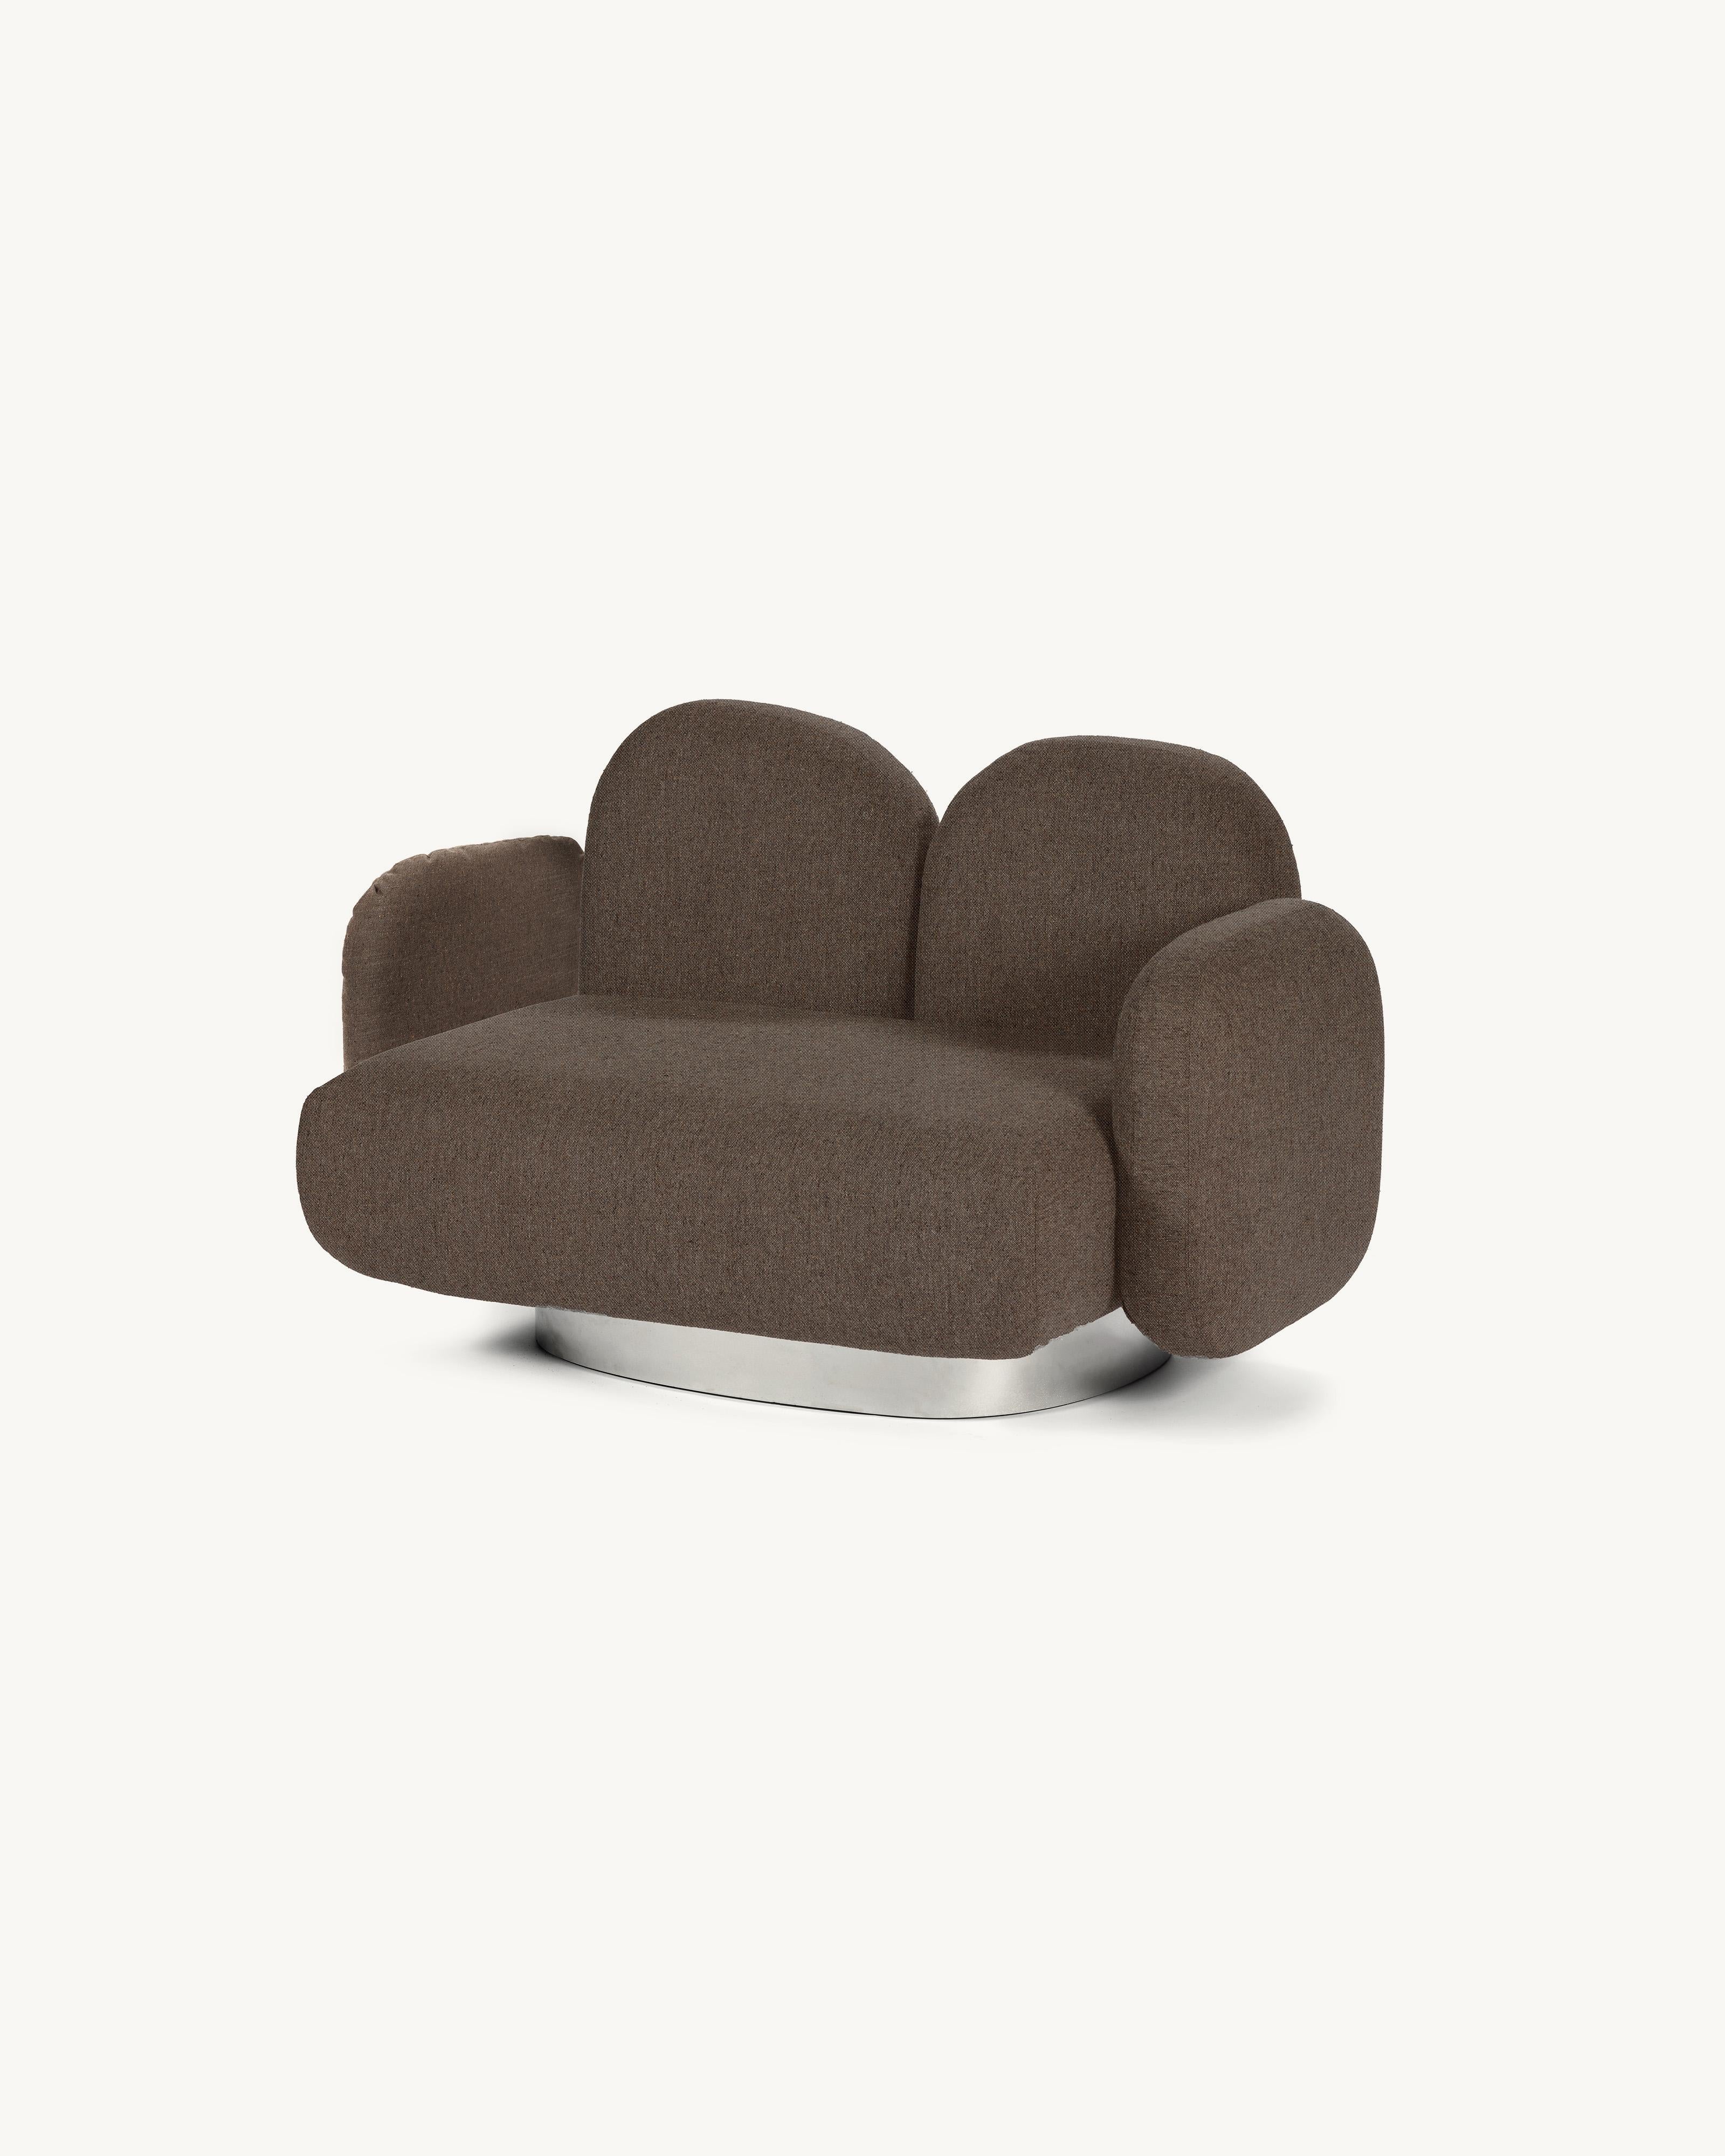 Modular Sofa Assemble 1-seat-sofa with 2 armrests 
Designed by Destroyers/Builders x Valerie Objects
Upholstery: Sevo Rust

Code: V9020320

Dimensions: L 87 W 143 H 85CM (SH 40 cm)
Materials: Wood, aluminium and upholstery

The ASSEMBLE sofa